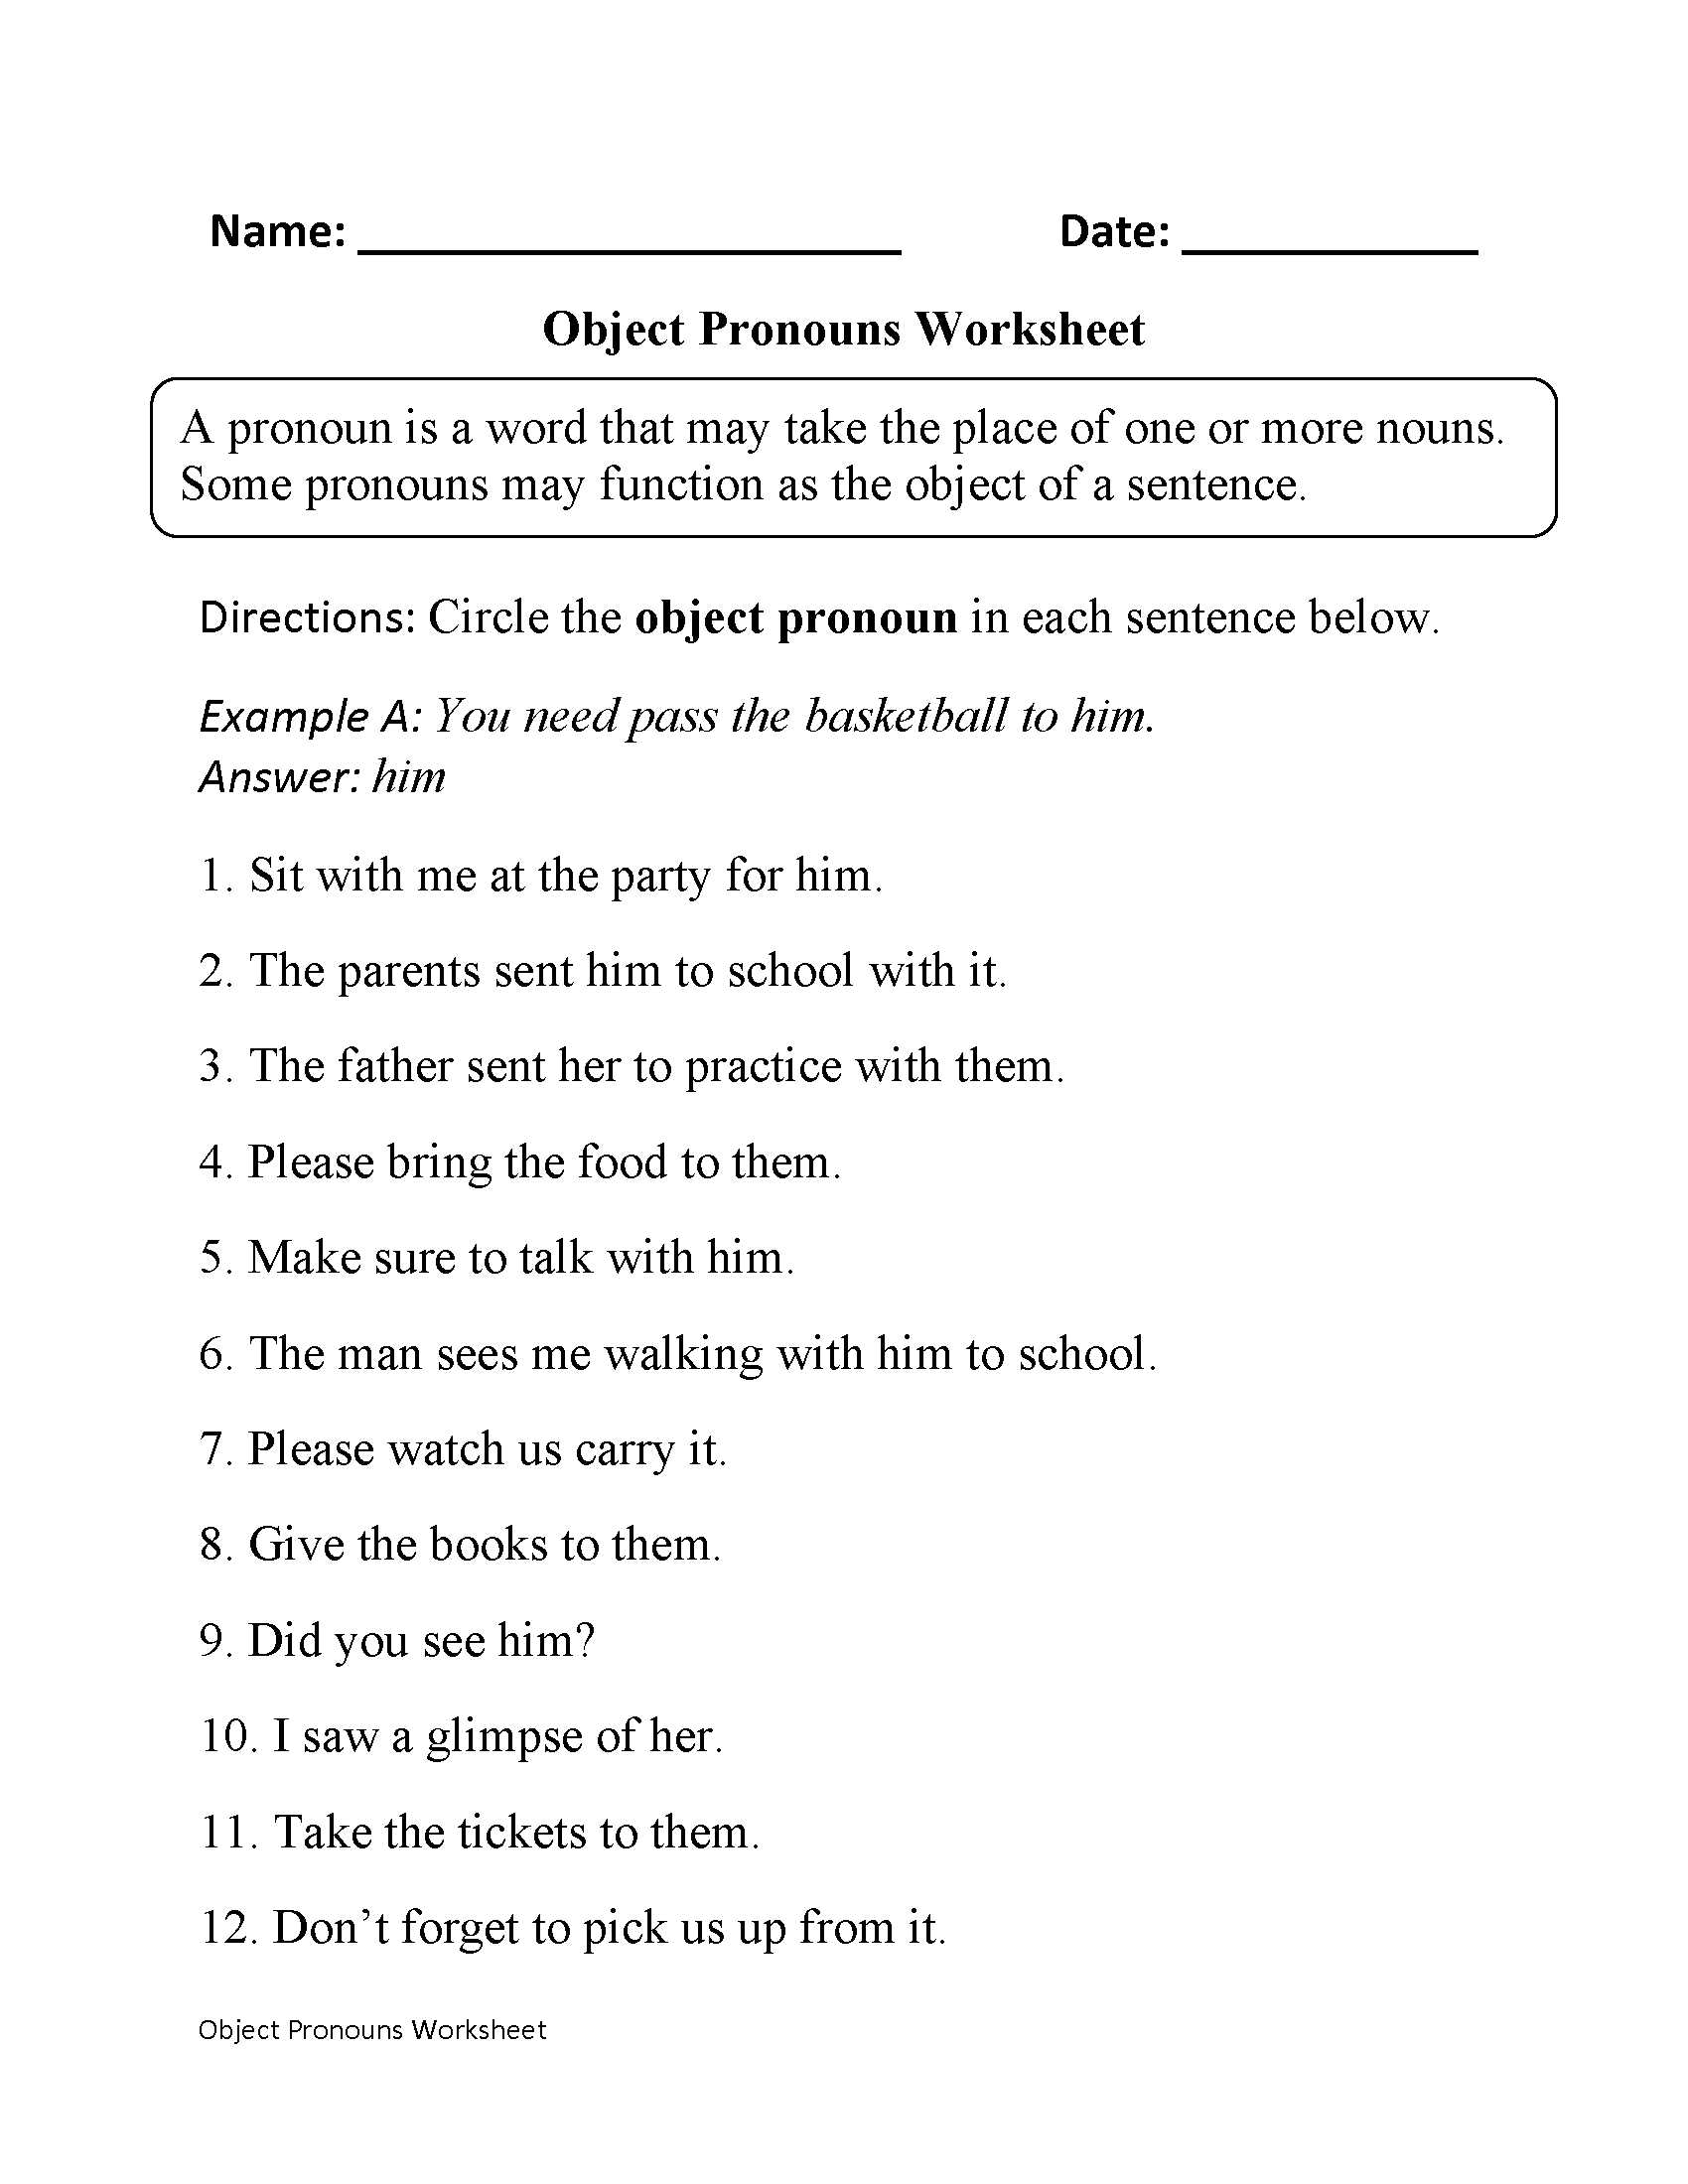 Spanish to English Worksheets Also Schoolexpress Free Worksheets A Great Way to Help